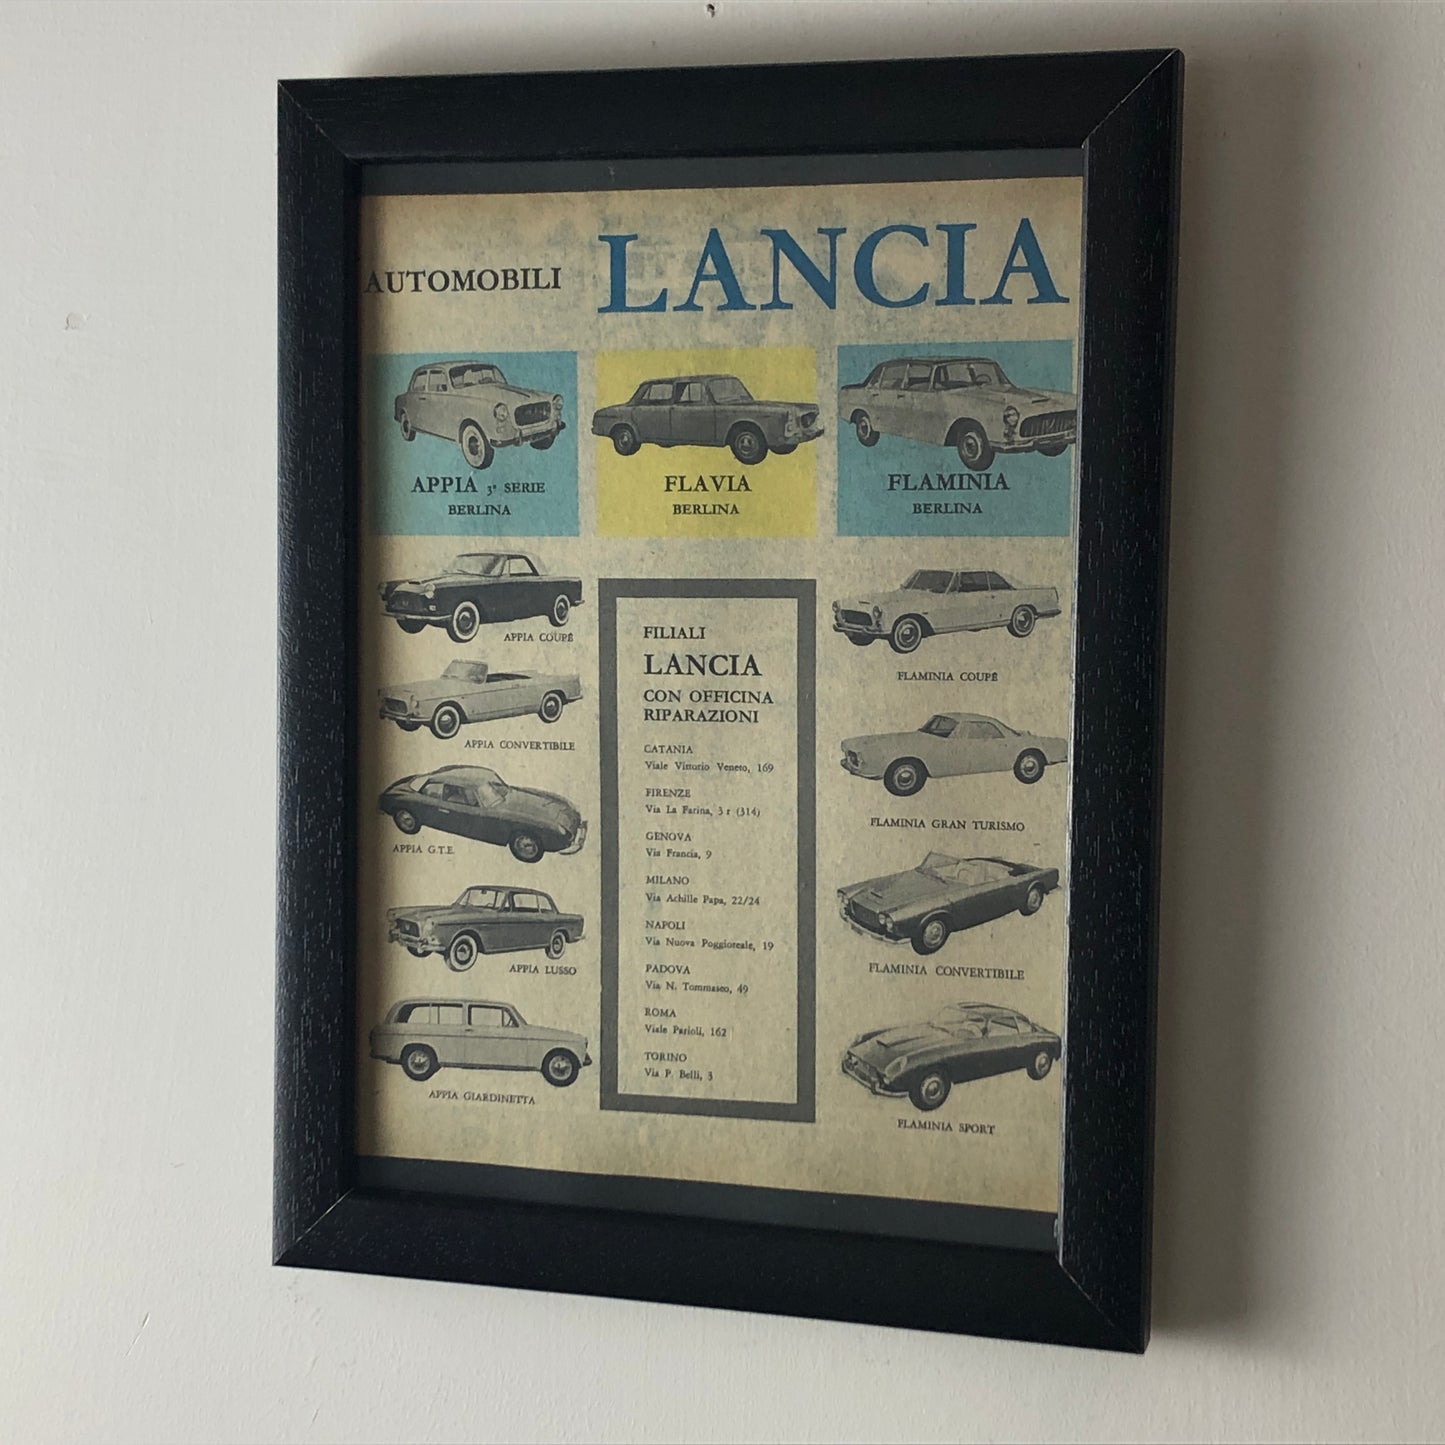 Lancia, 1960 Lancia Range Advertisement and List of Branches with Repair Shop